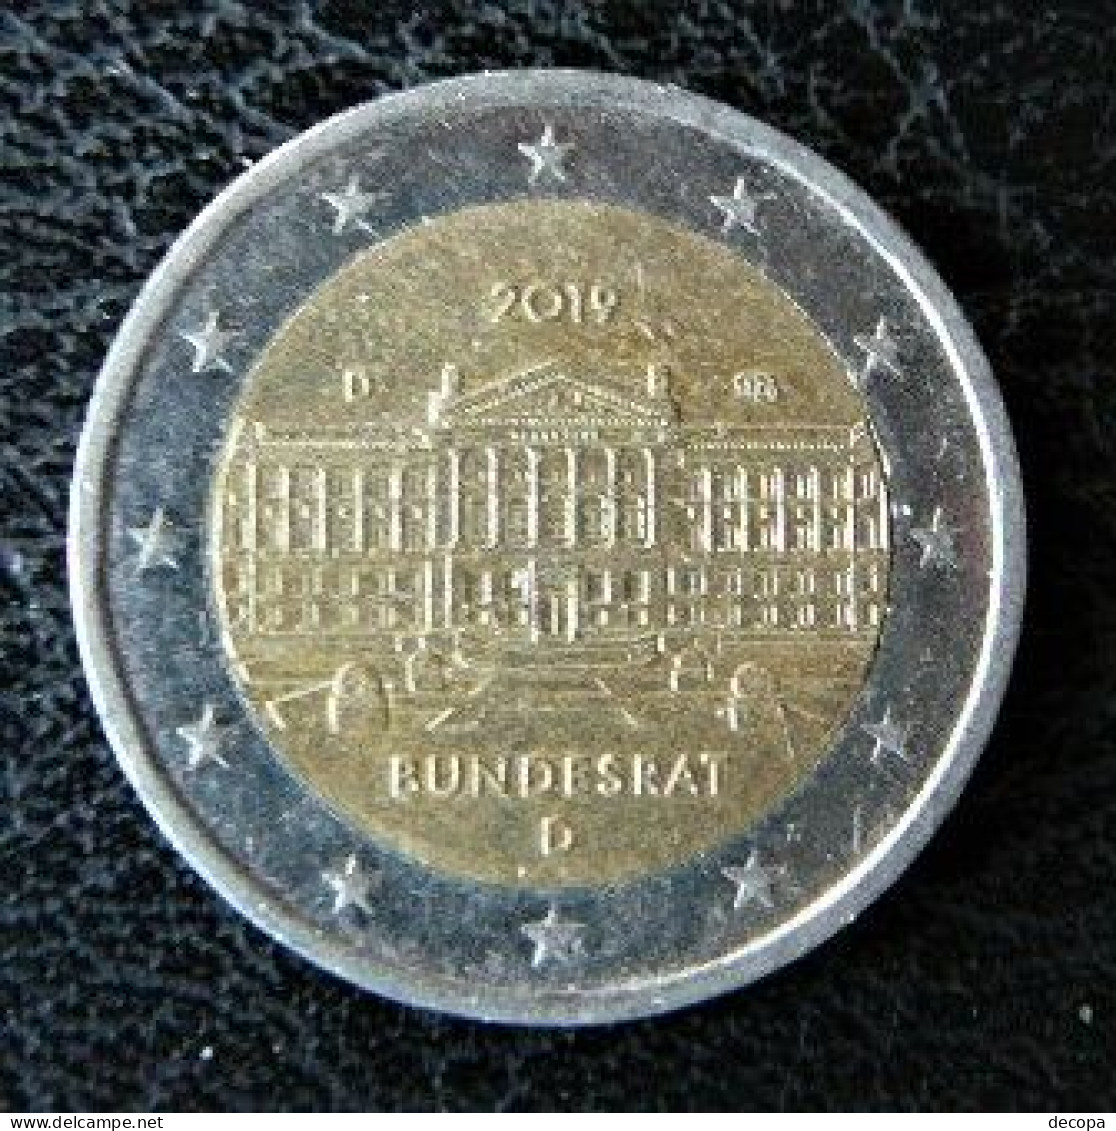 Germany - Allemagne - Duitsland   2 EURO 2019 D     Speciale Uitgave - Commemorative - Germany